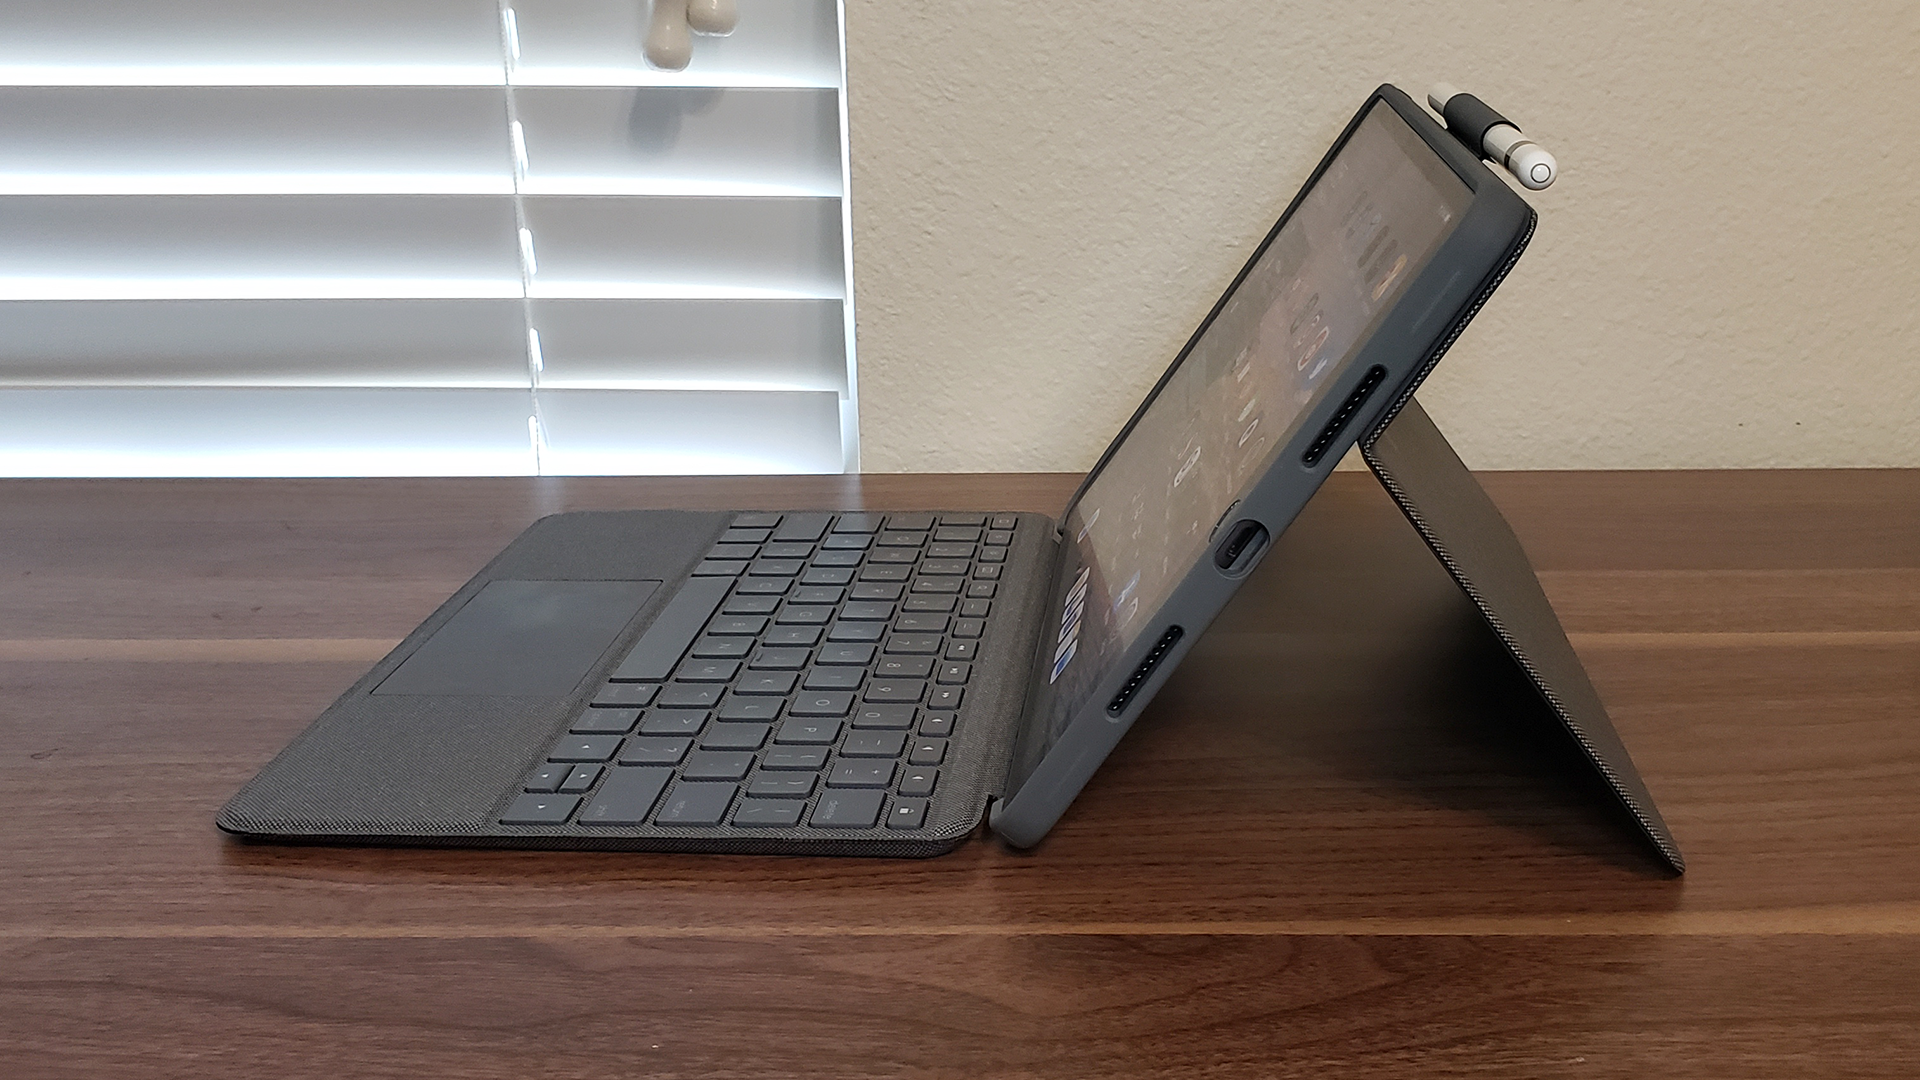 The Combo Touch takes up around a foot of space when extended---more than a laptop.